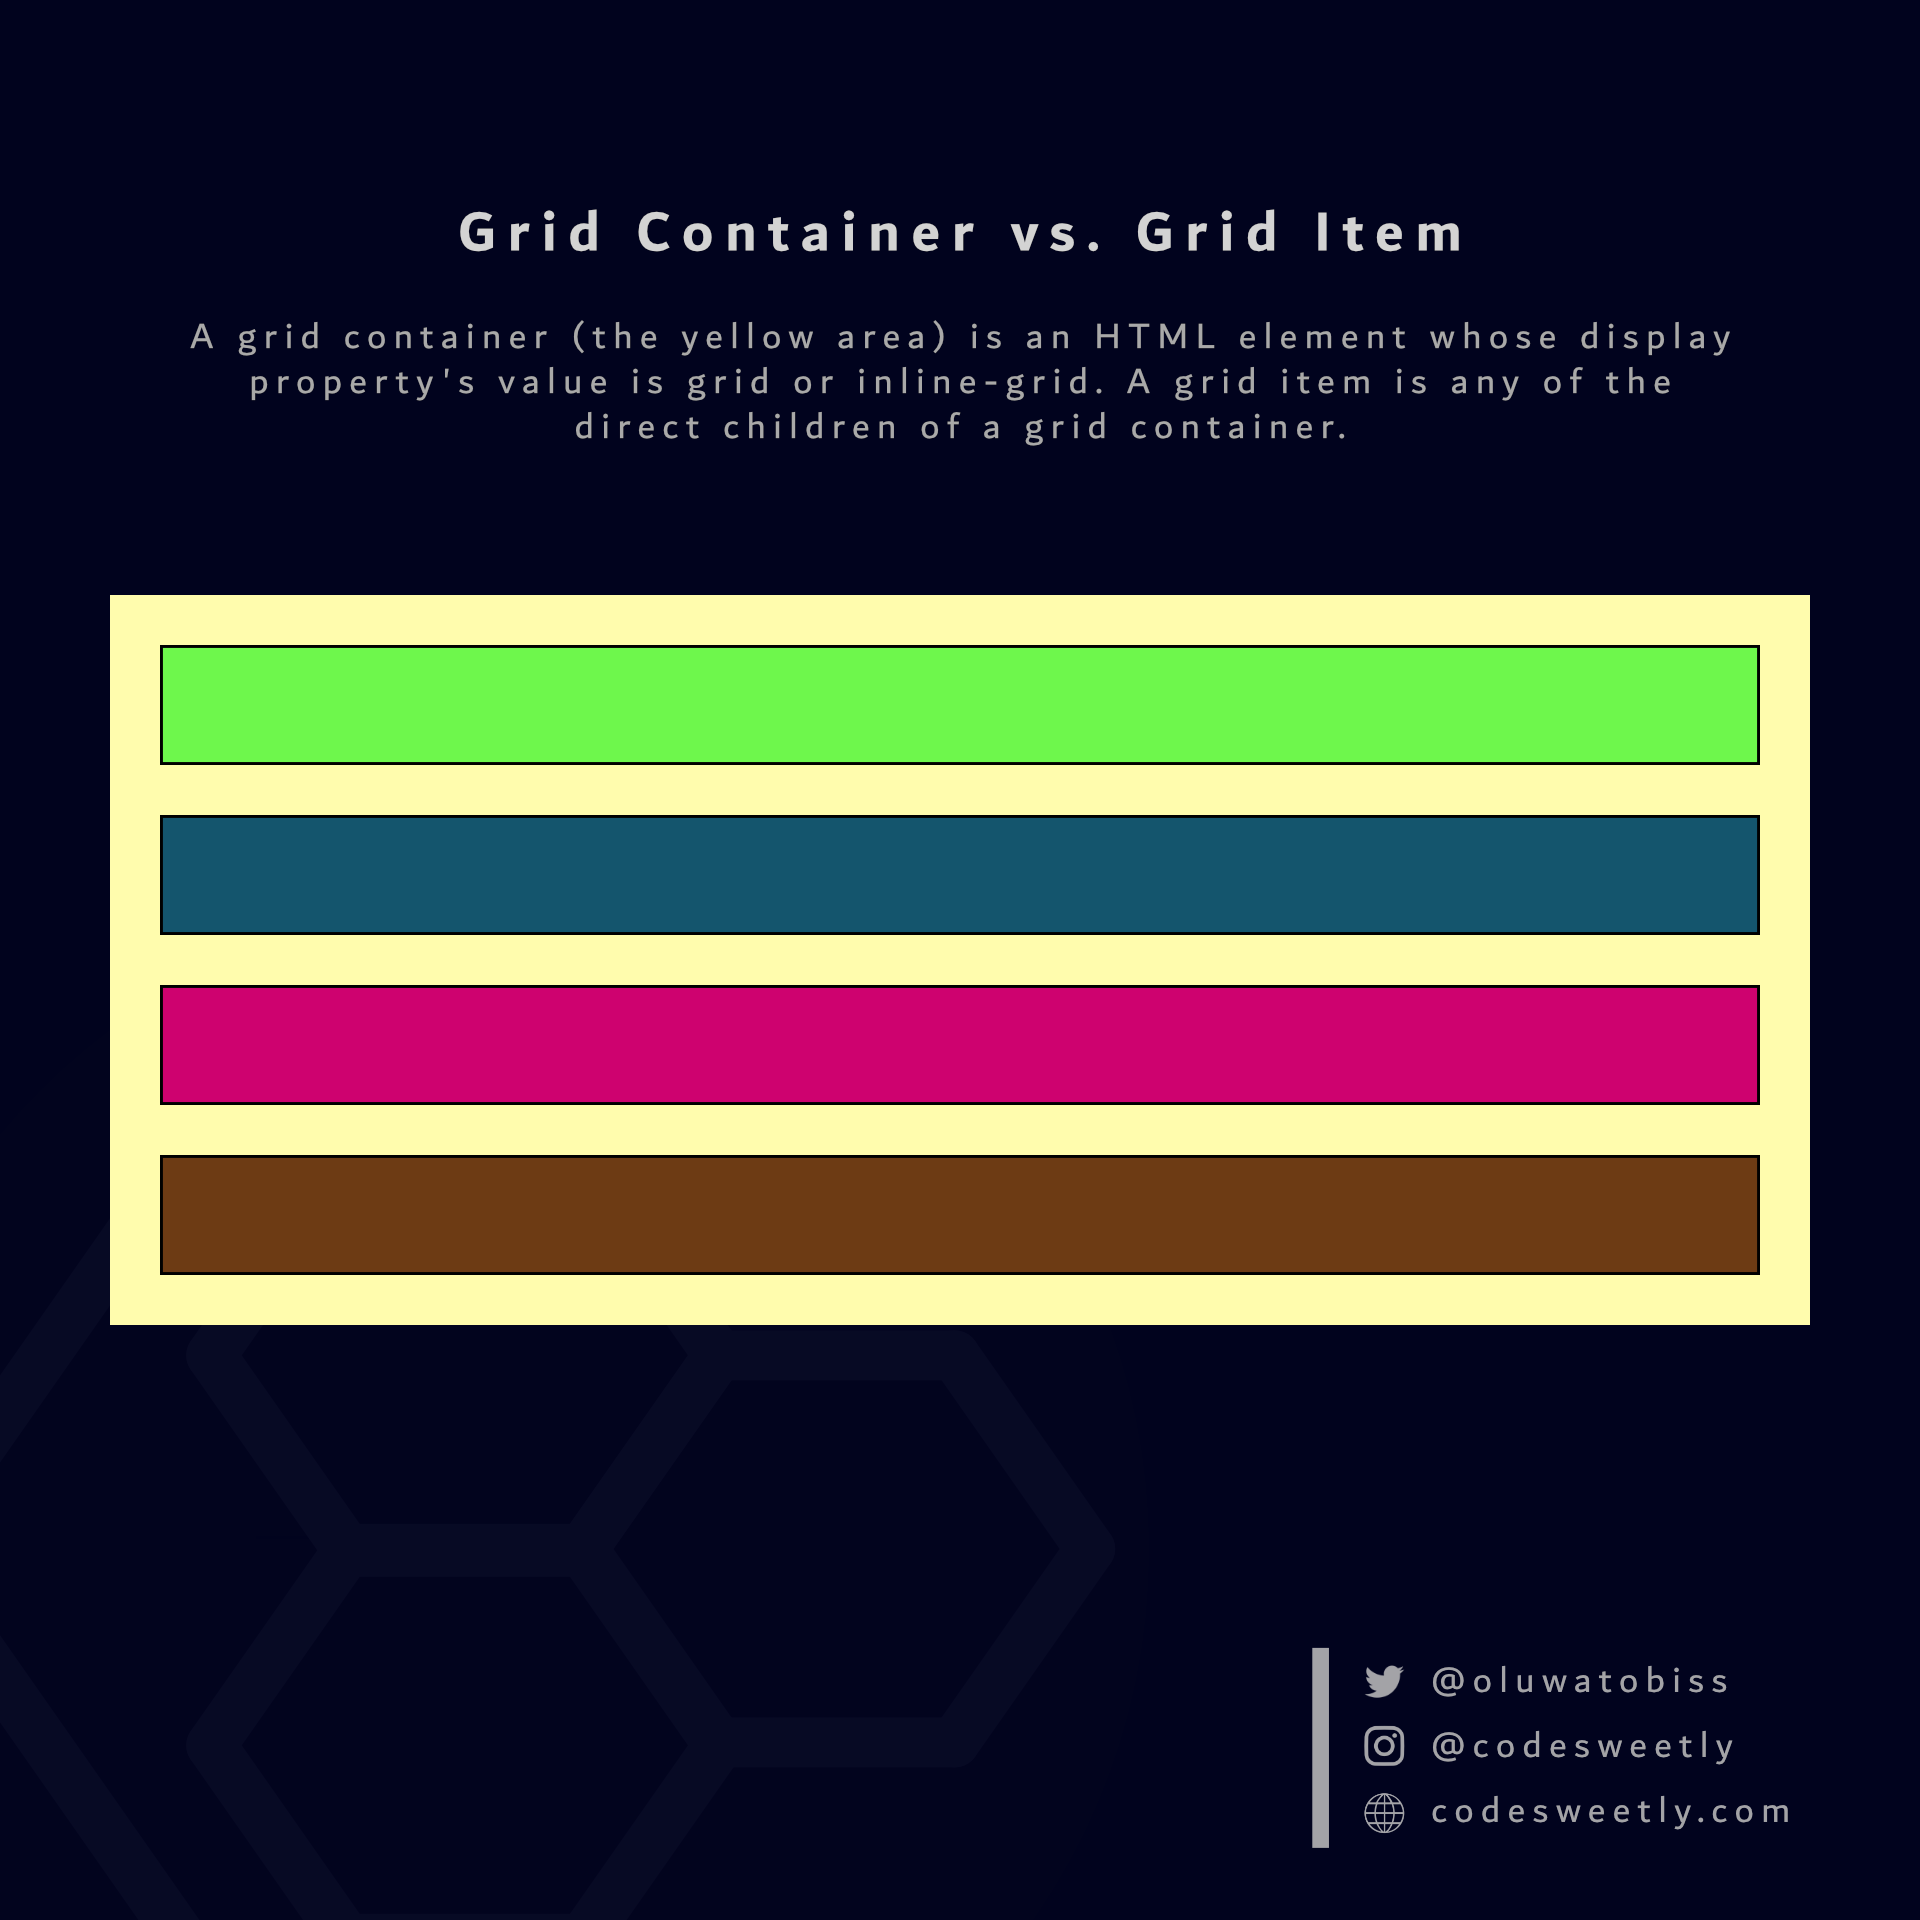 A display property's grid (or inline-grid) value creates a grid container and grid items